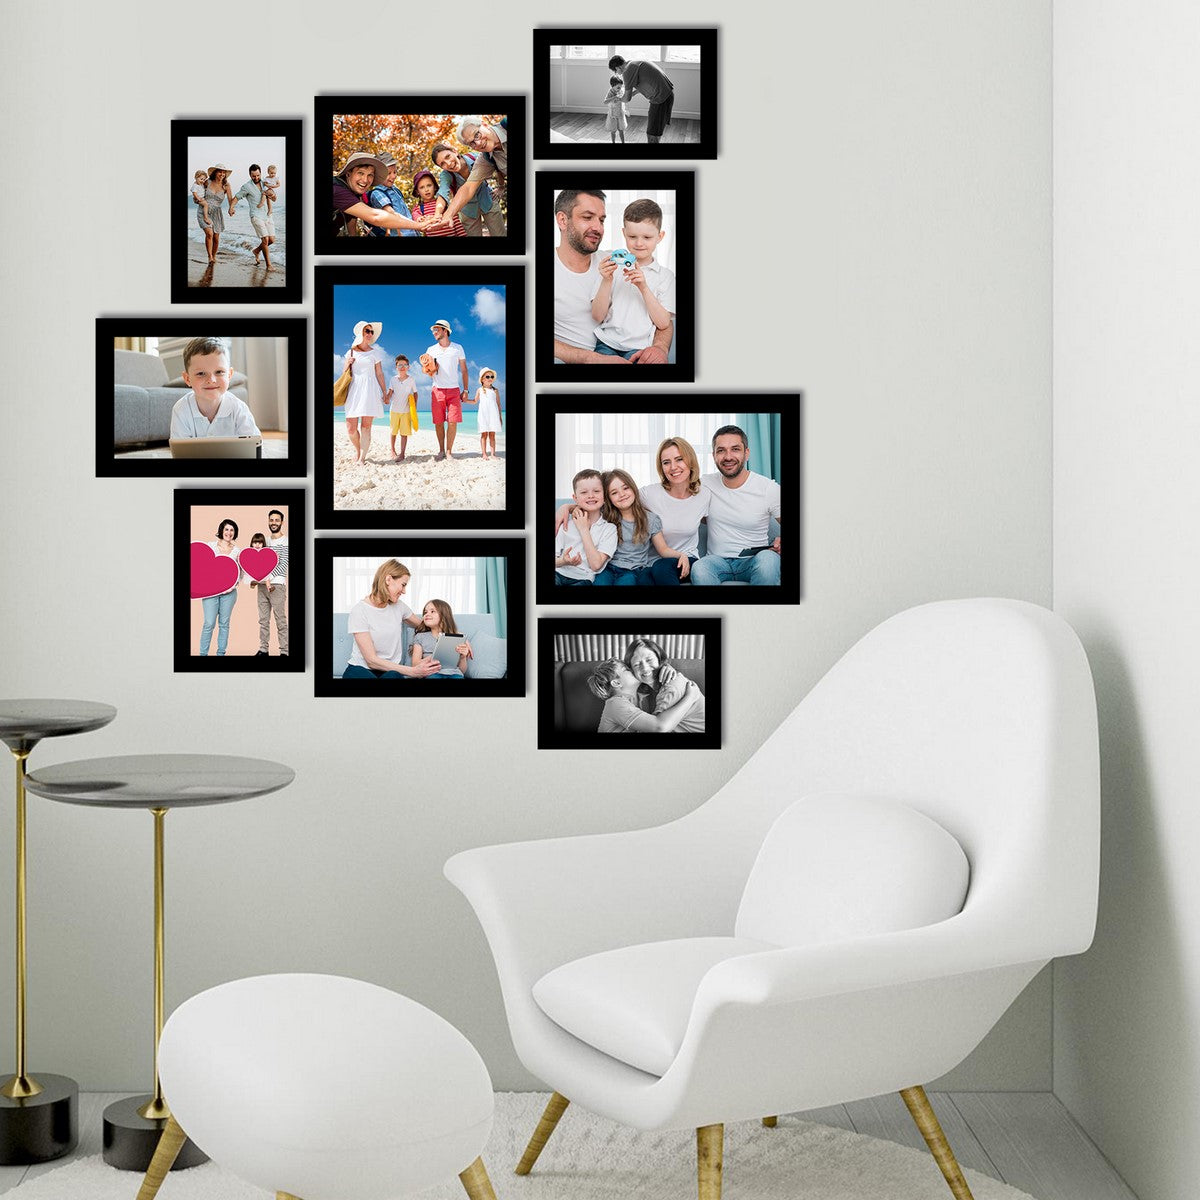 Memory Wall Collage Photo Frame - Set of 10 Photo Frames for 4 Photos of 5"x7", 4 Photos of 6"x8" and 2 Photos of 8"x10" 2